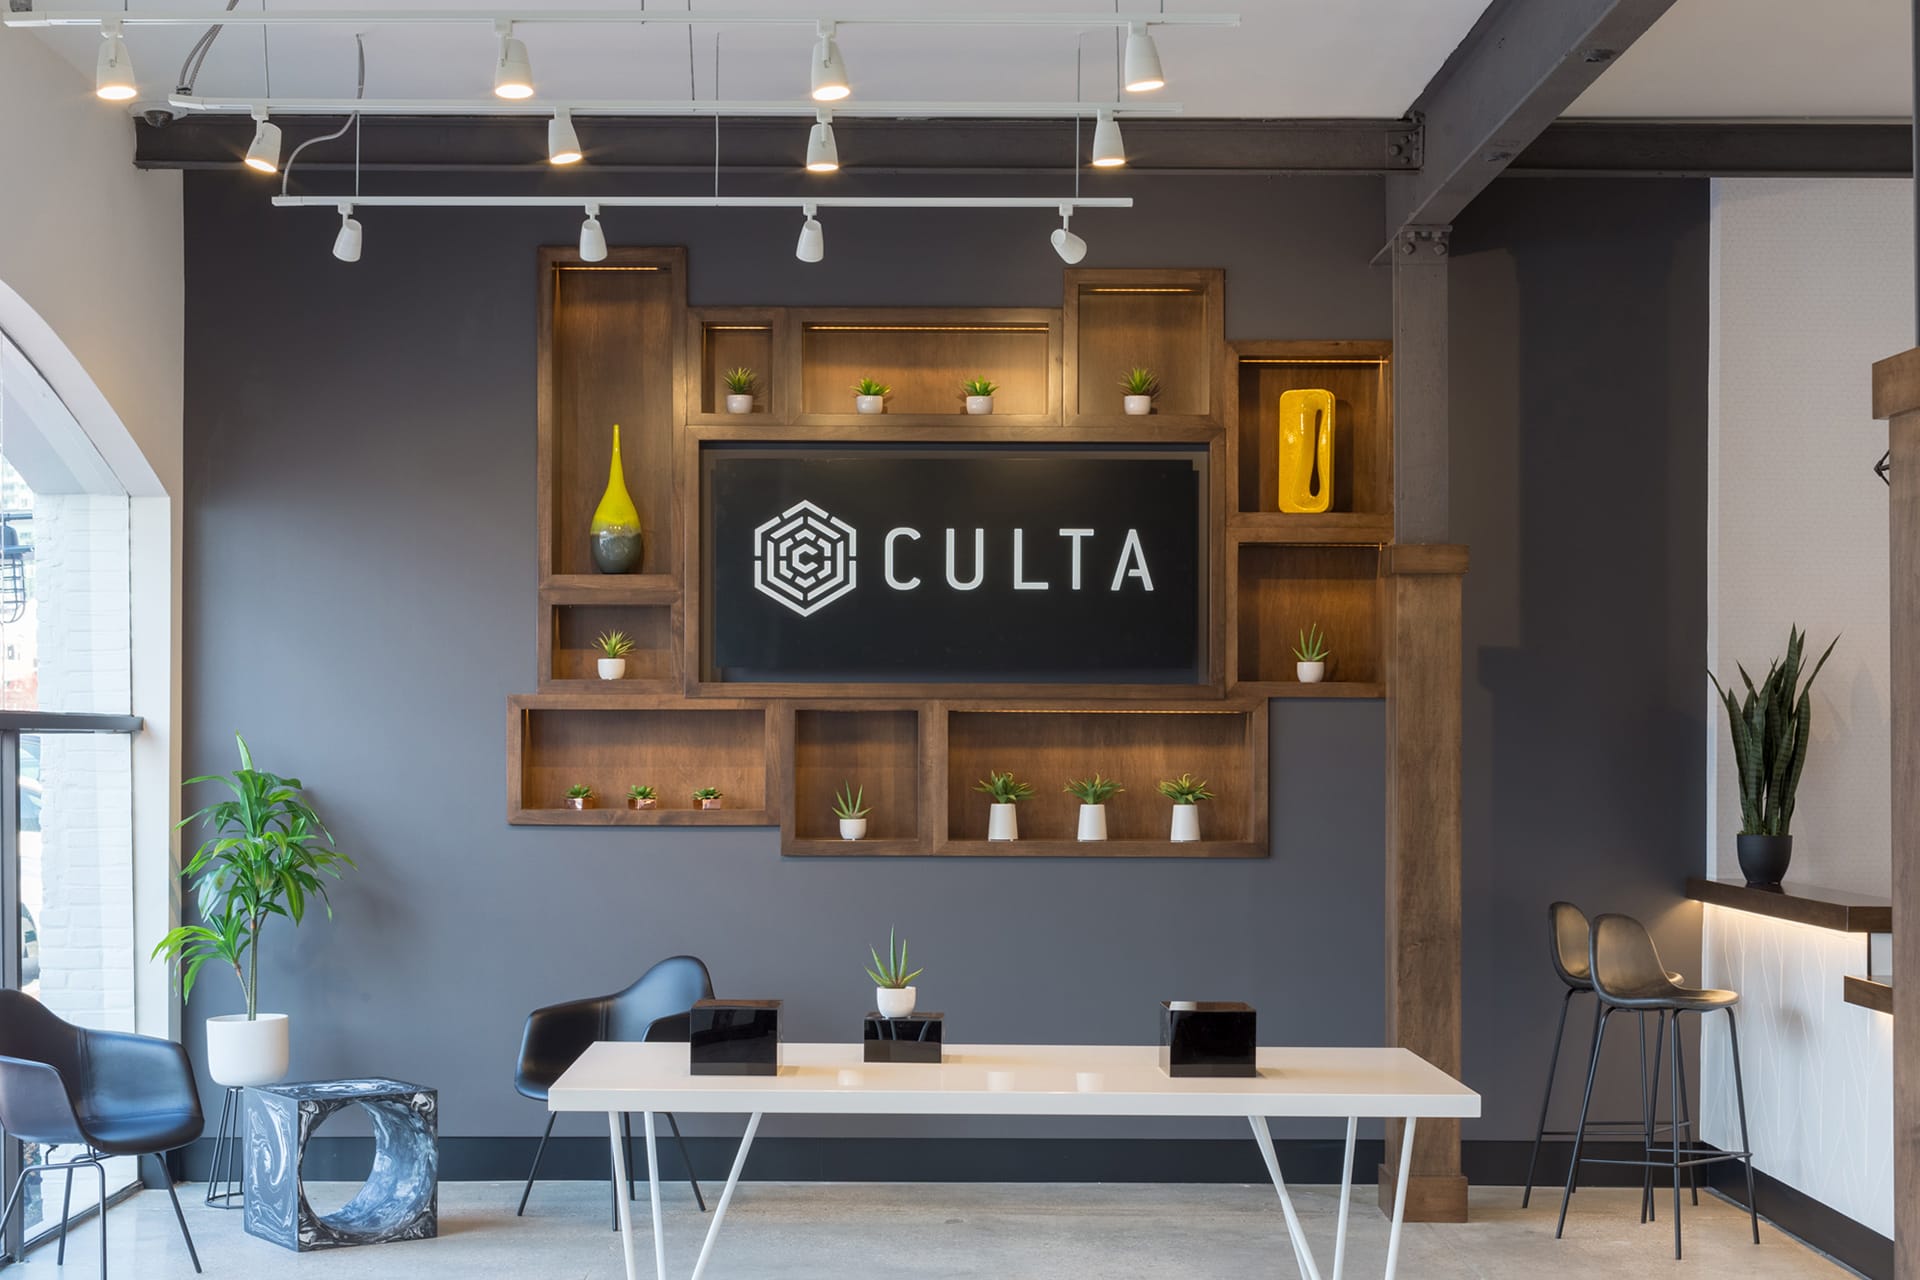 Featured image for “CULTA”